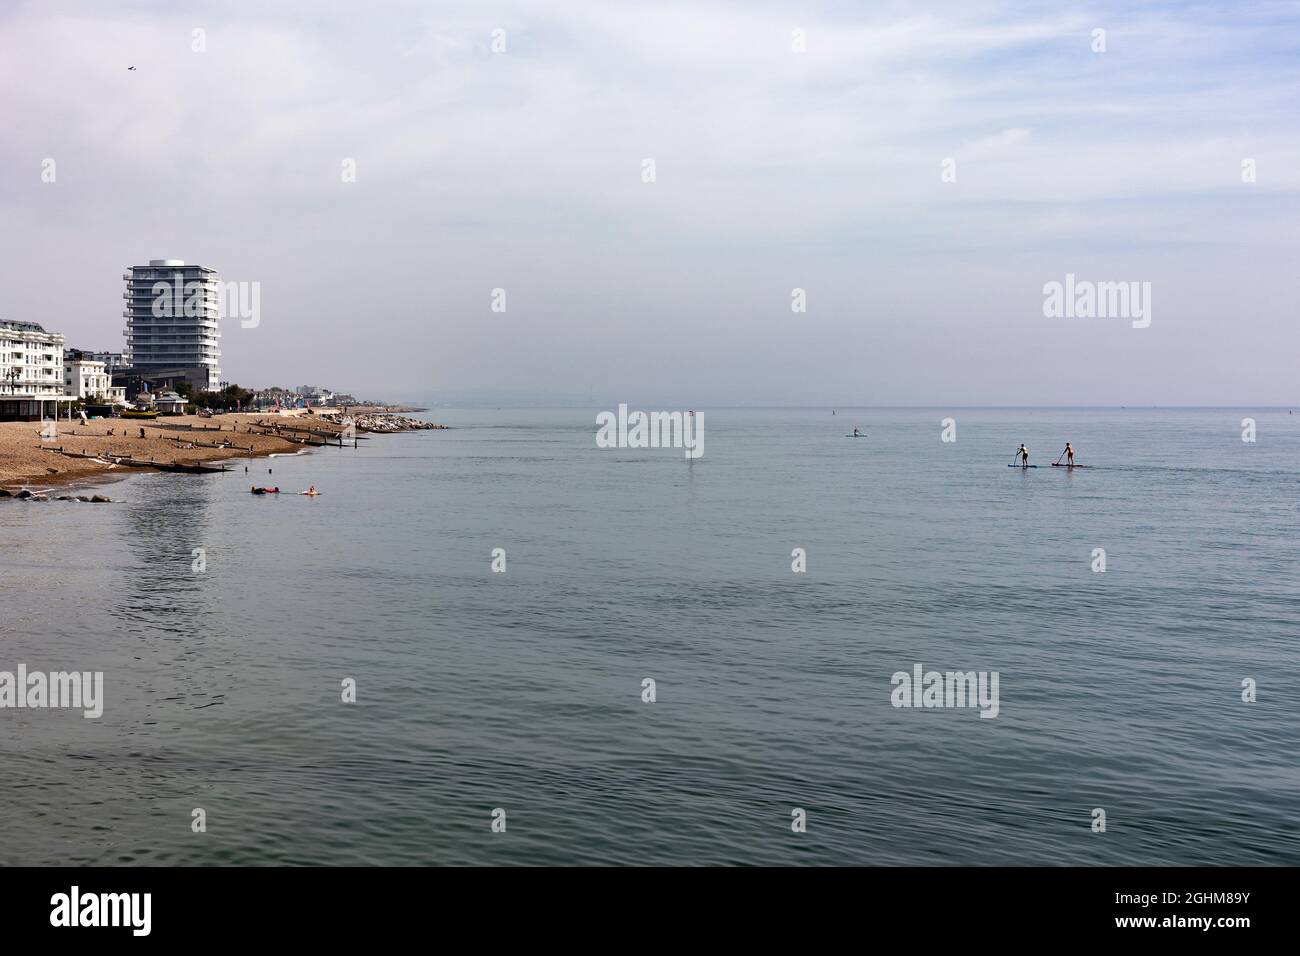 people paddle boarding in the sea in Worthing, West Sussex, UK, in September 2021 Stock Photo